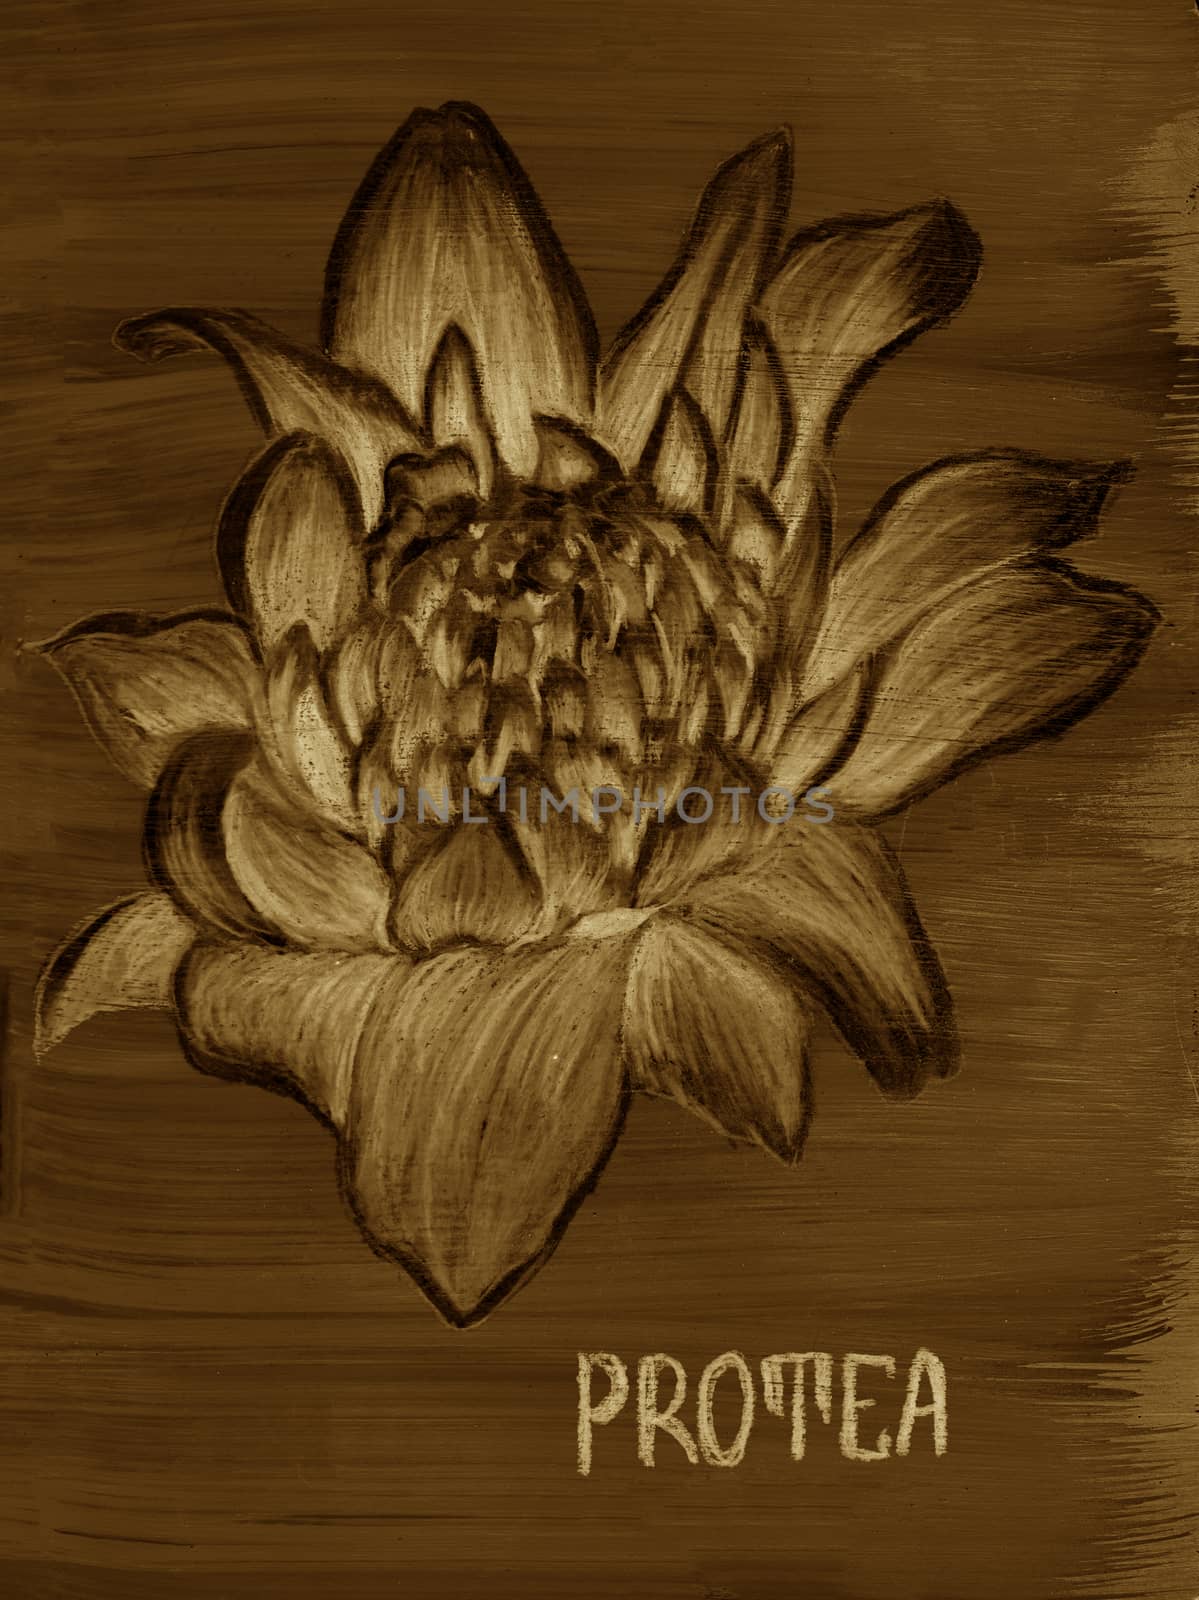 Protea drawing. Drawing of exotic flower. Hand-drawn illustration. Sepia, brow and beige colors by sshisshka